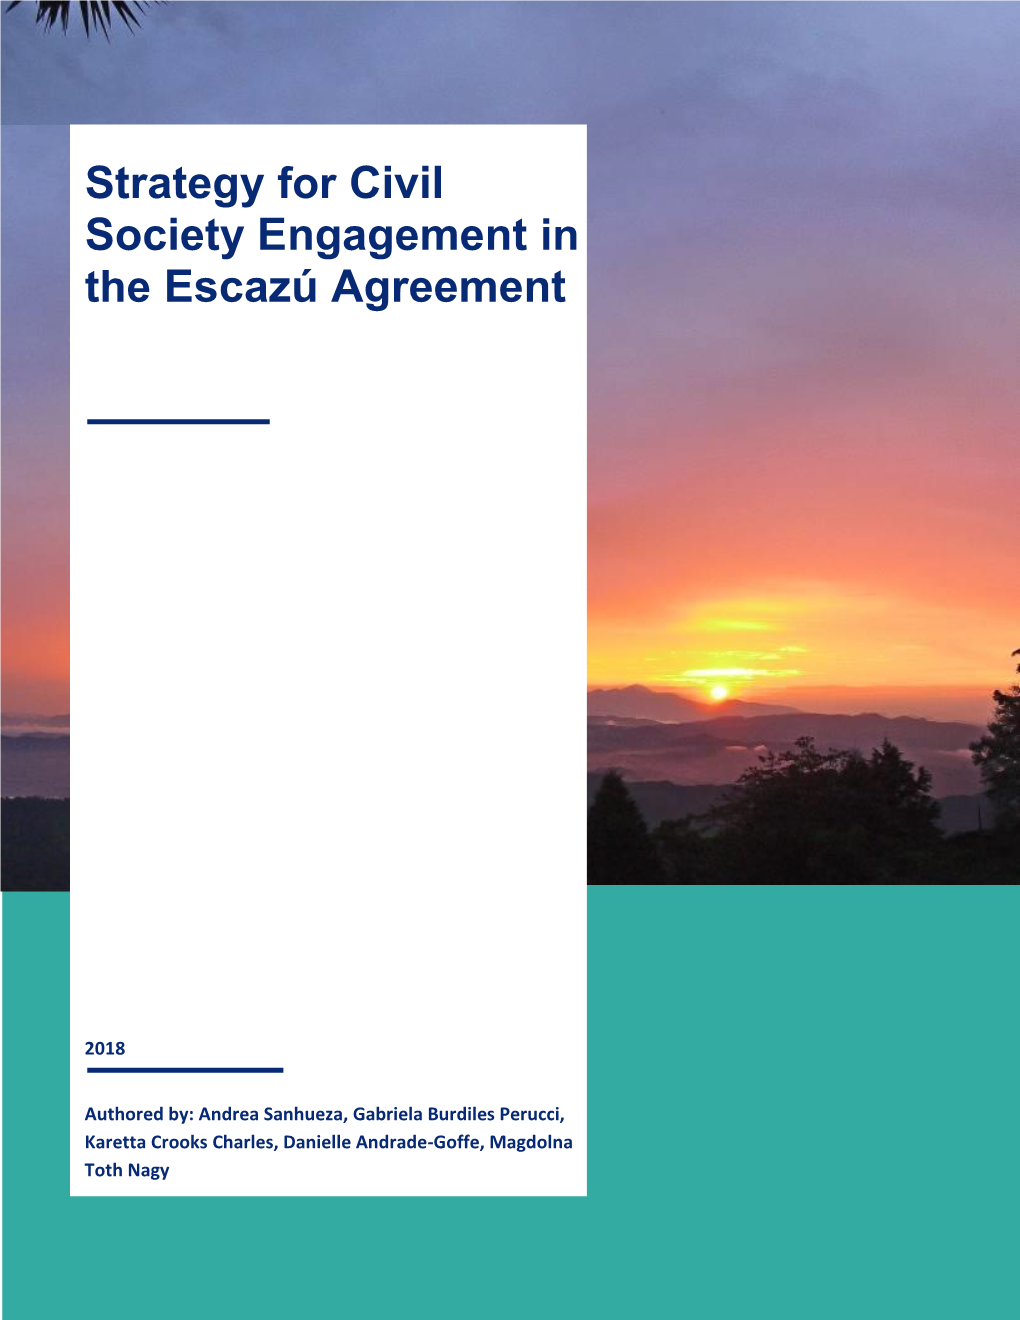 Strategy for Civil Society Engagement in the Escazú Agreement